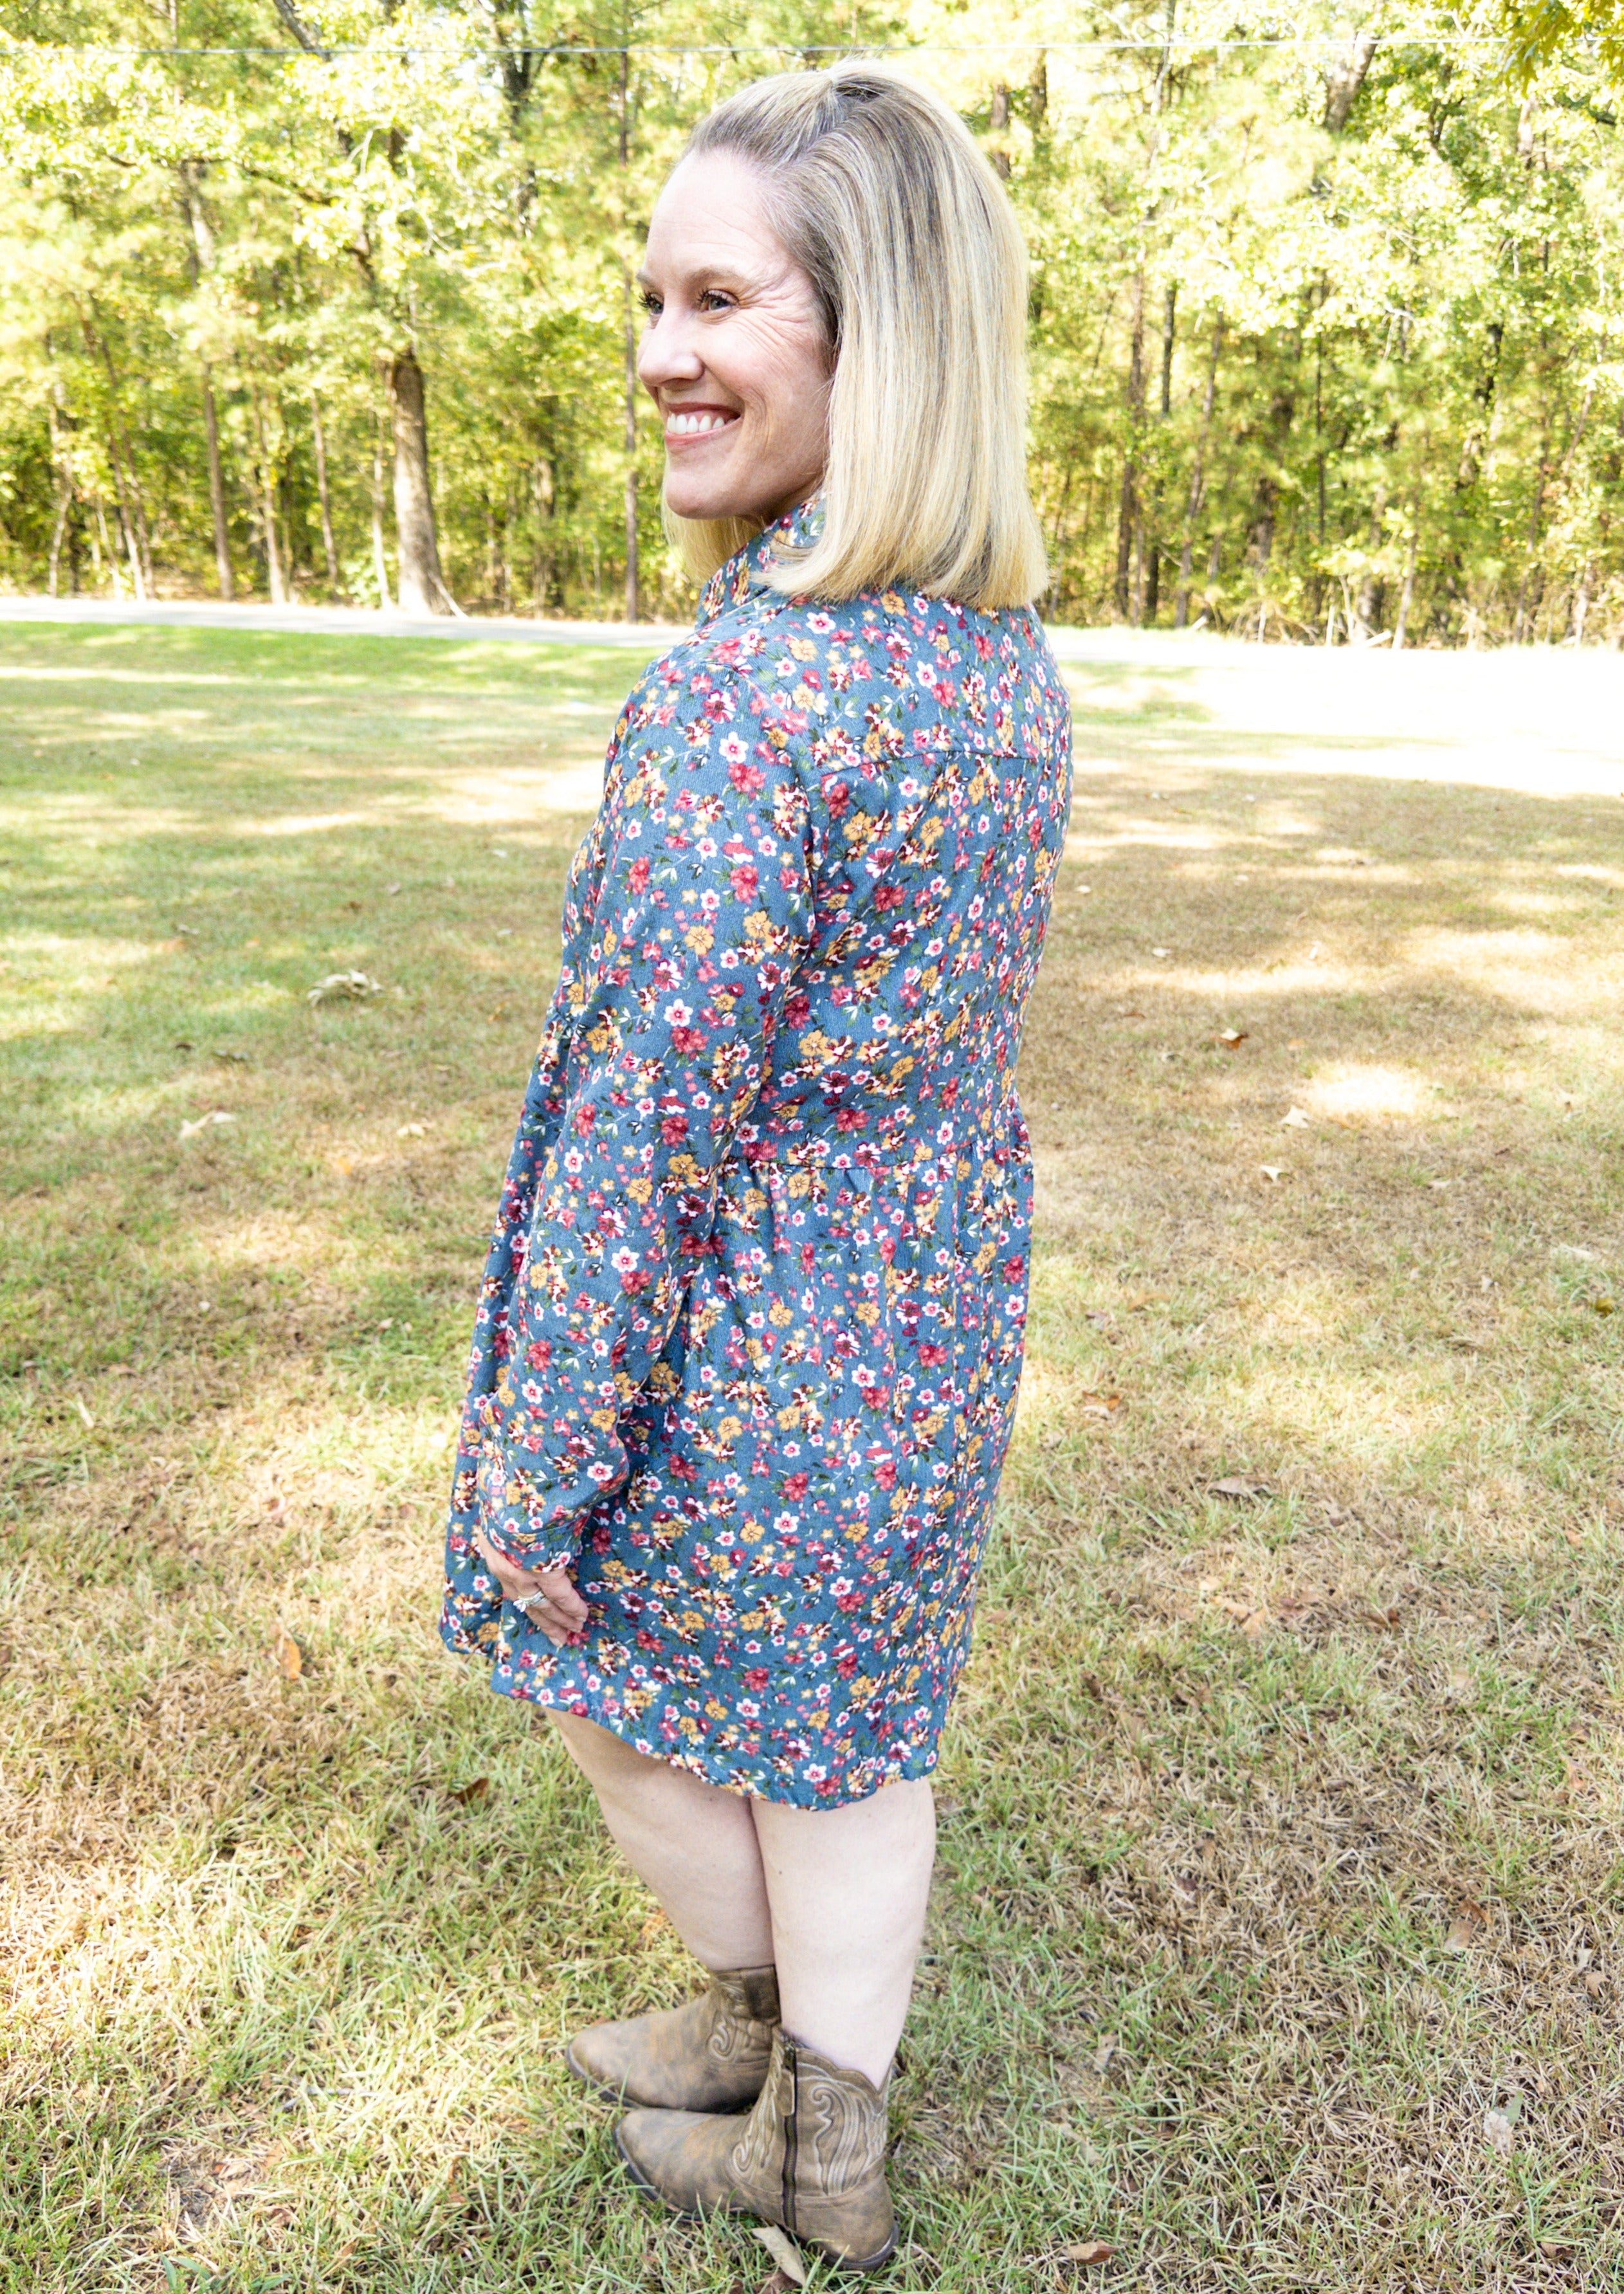 side/back view of Dusty blue corduroy dress with long sleeves and a soft colored floral pattern all over. The dress has buttons all down the front and a collar.